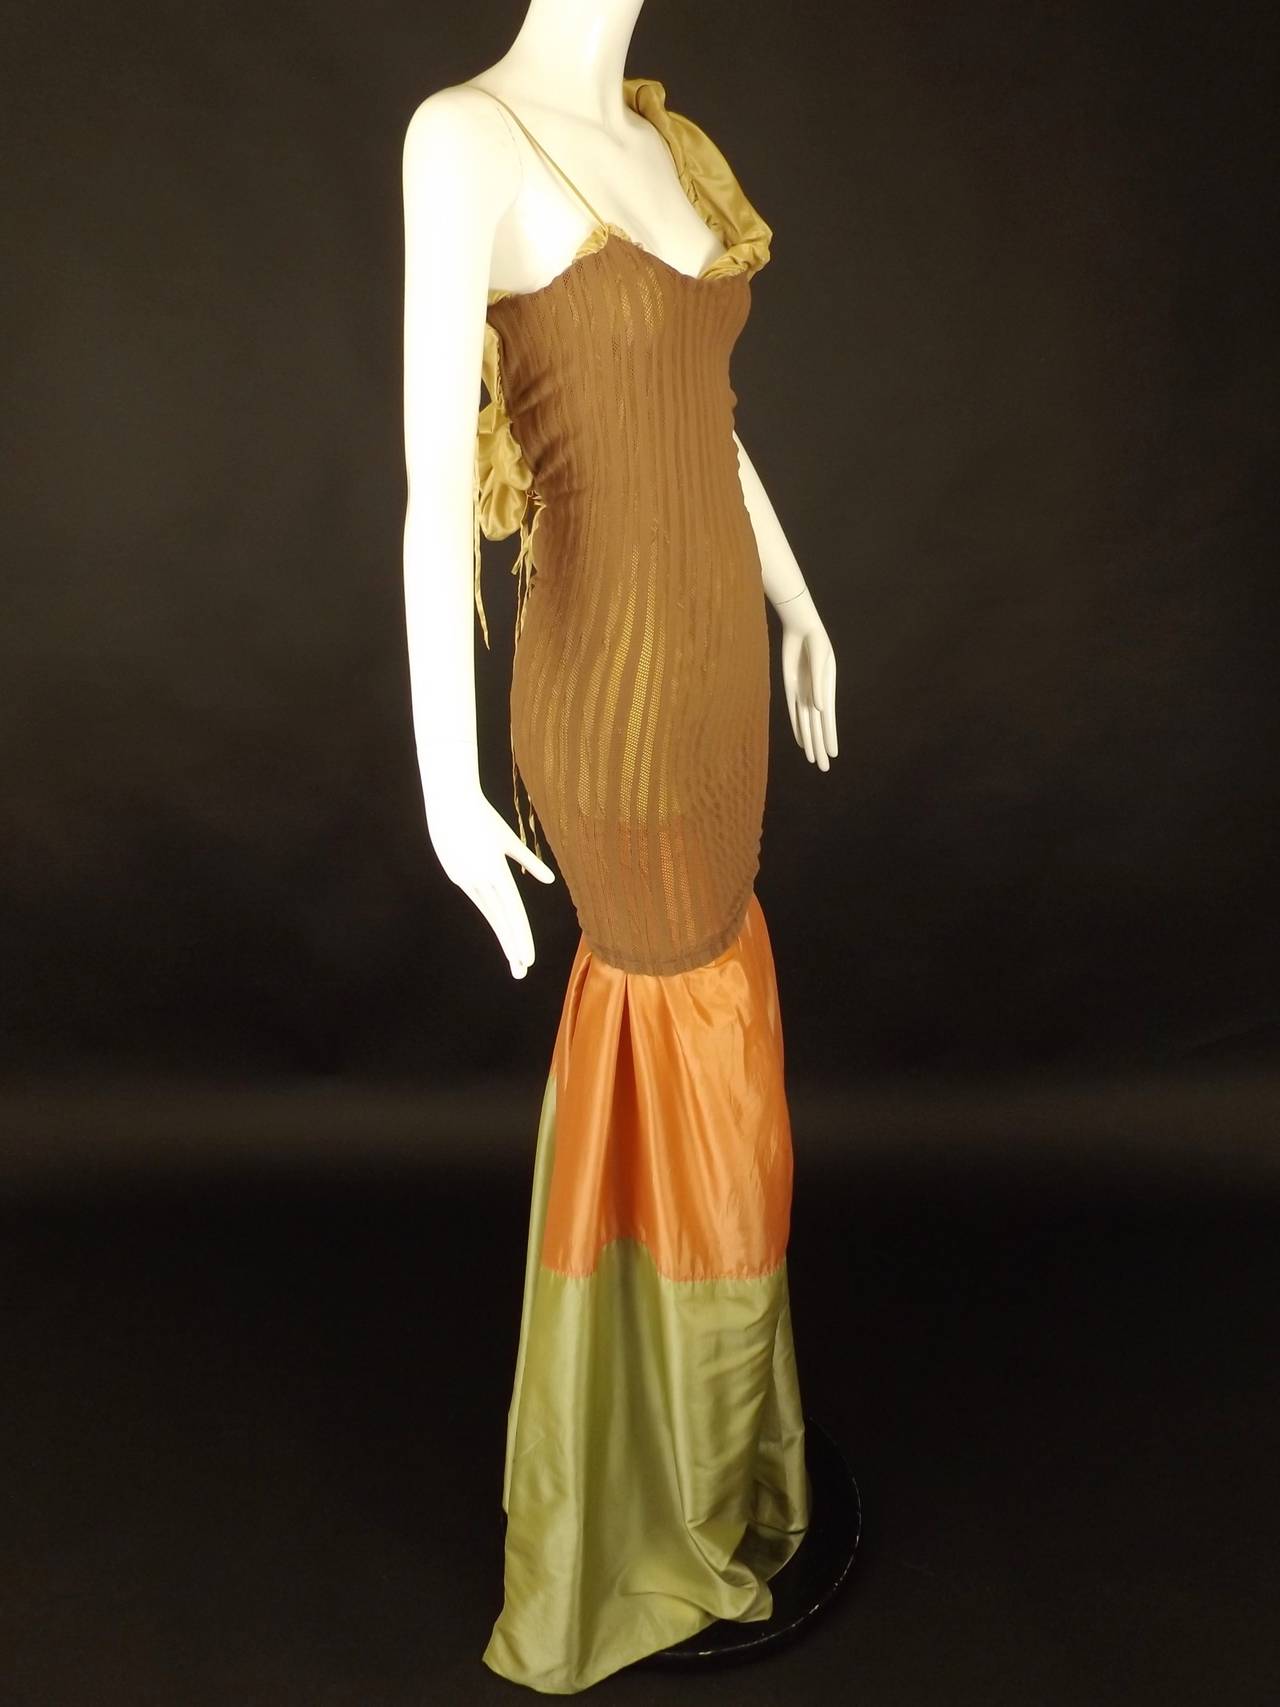 2001 Knit & Silk Jean Paul Gaultier Evening Dress In Excellent Condition For Sale In Dallas, TX